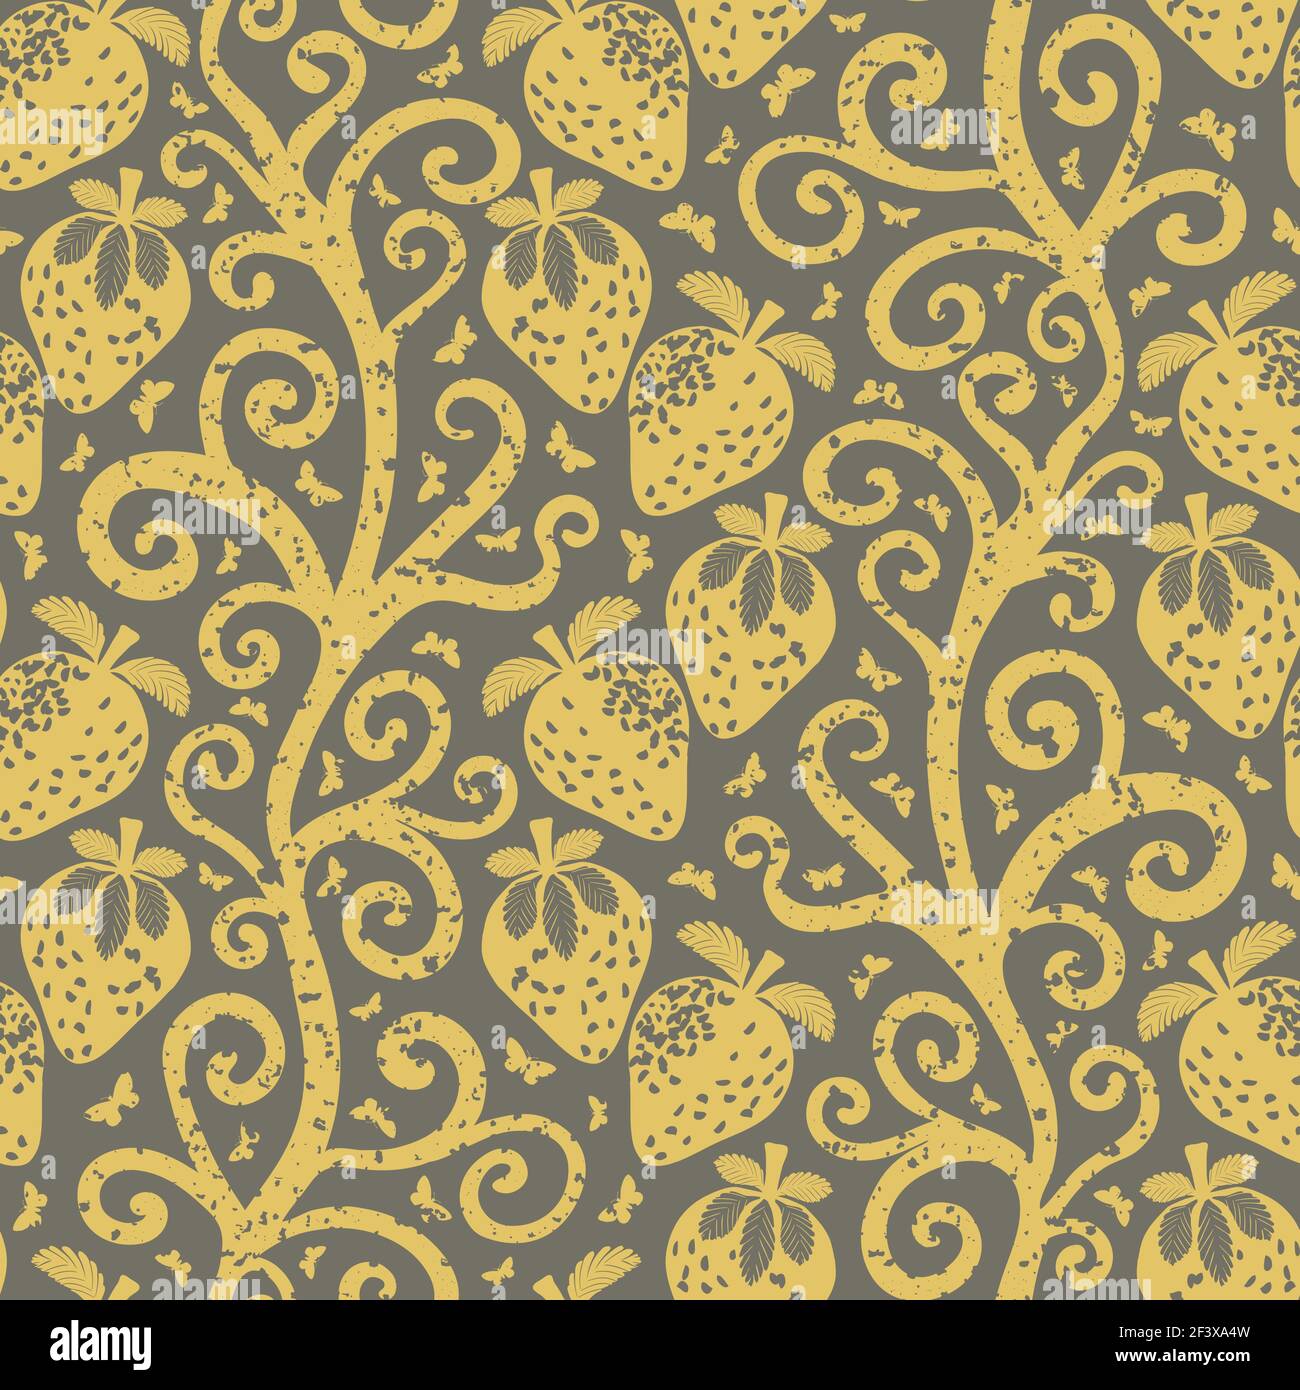 Strawberry linocut Indian Florals style seamless vector pattern background. Winding stems with berries and butterflies. Yellow grey design with aged Stock Vector